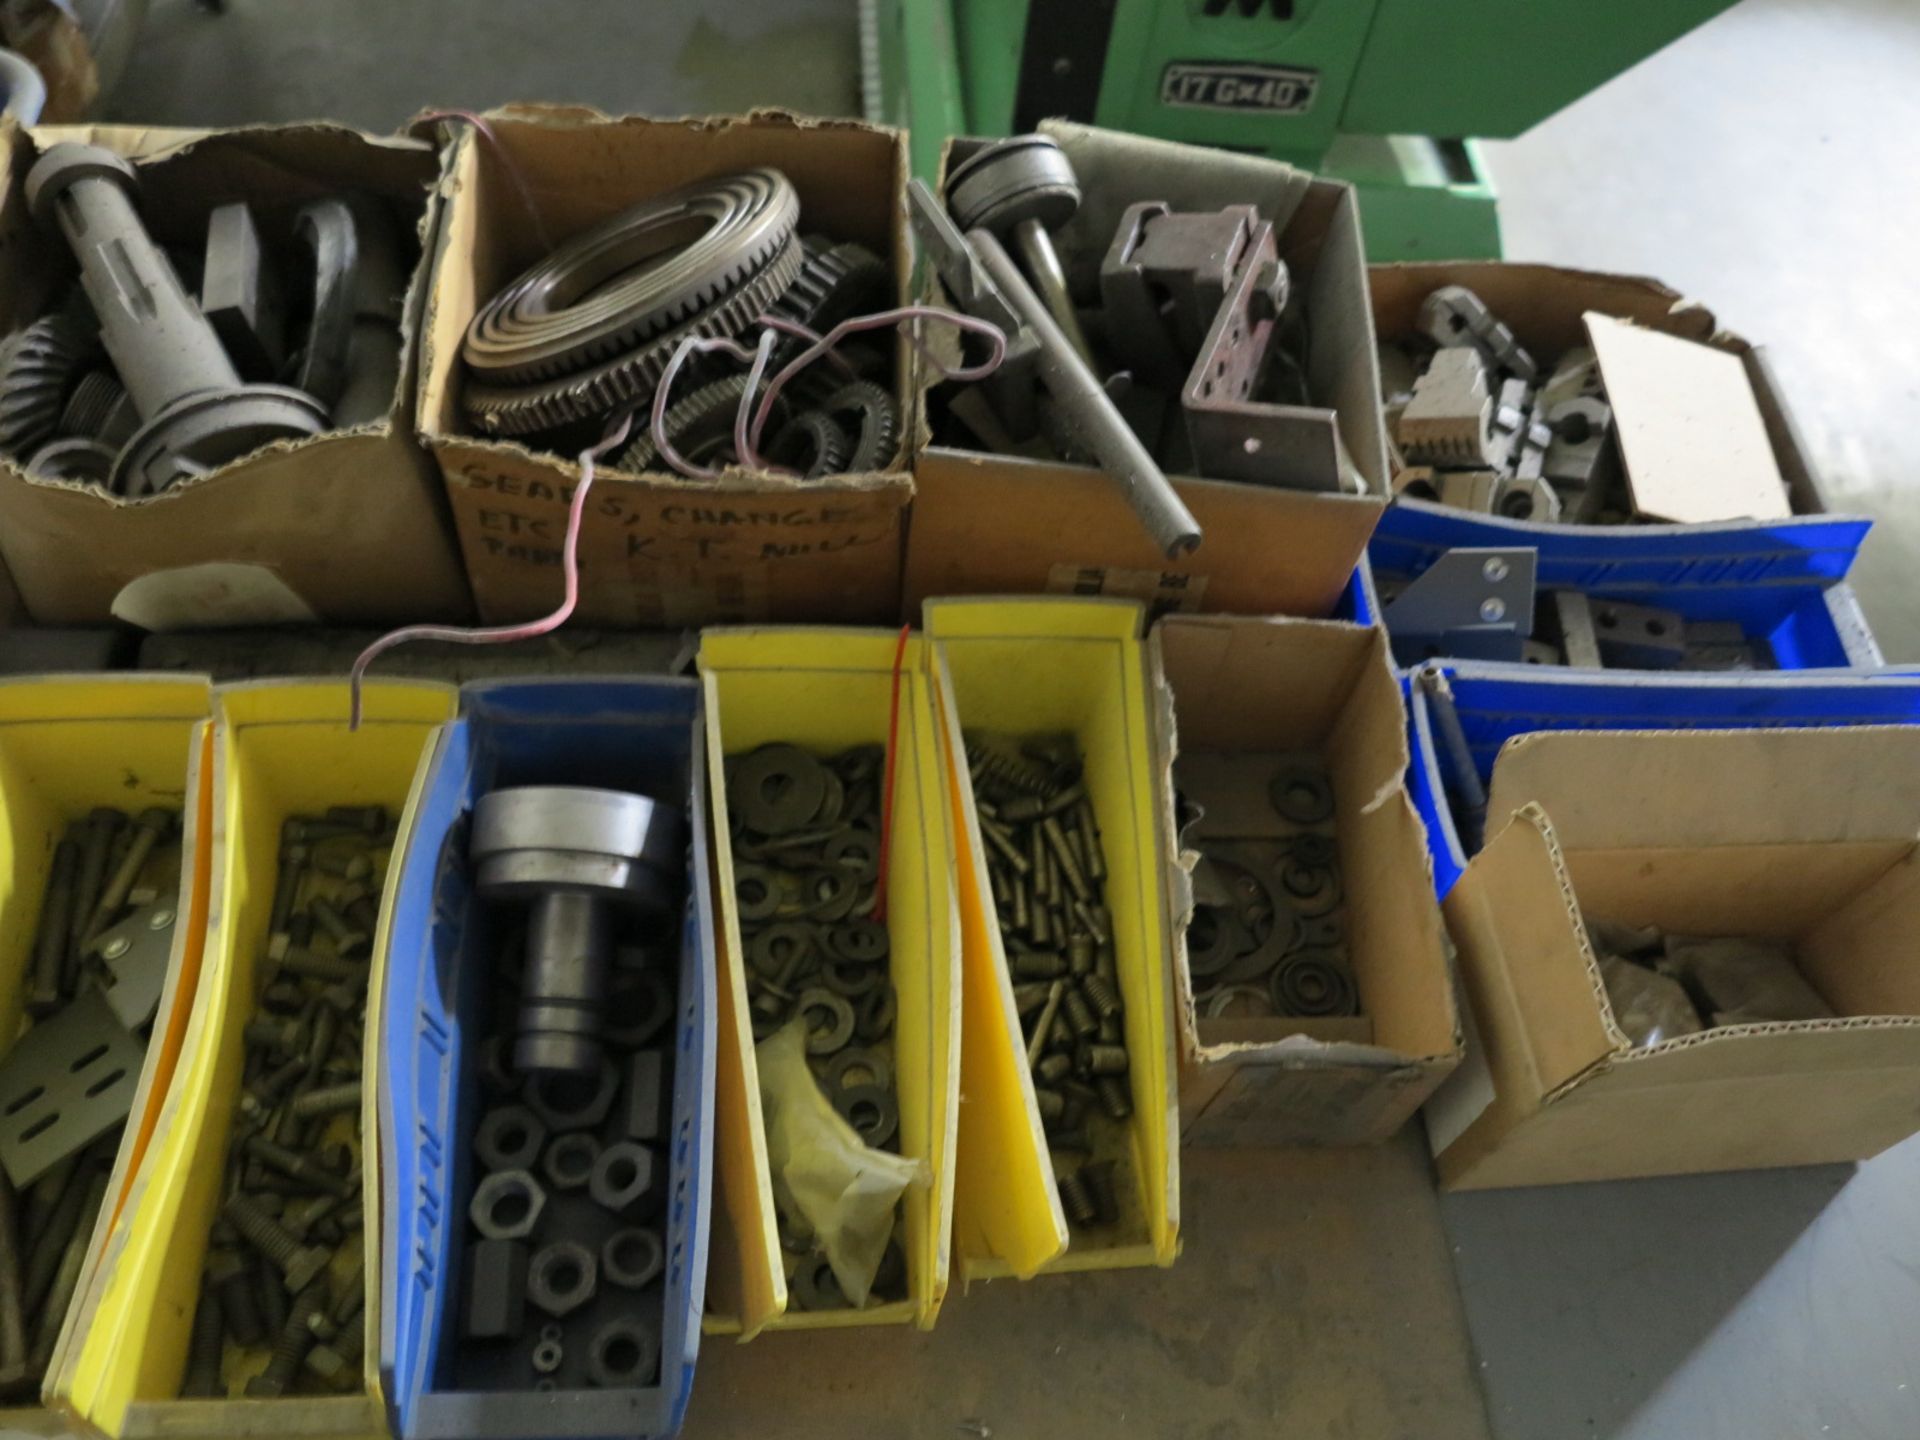 LOT - TABLE, W/ CONTENTS TO INCLUDE: ELECTRIC MOTORS, BOLTS, CHUCK JAWS AND MISC PARTS - Image 3 of 4